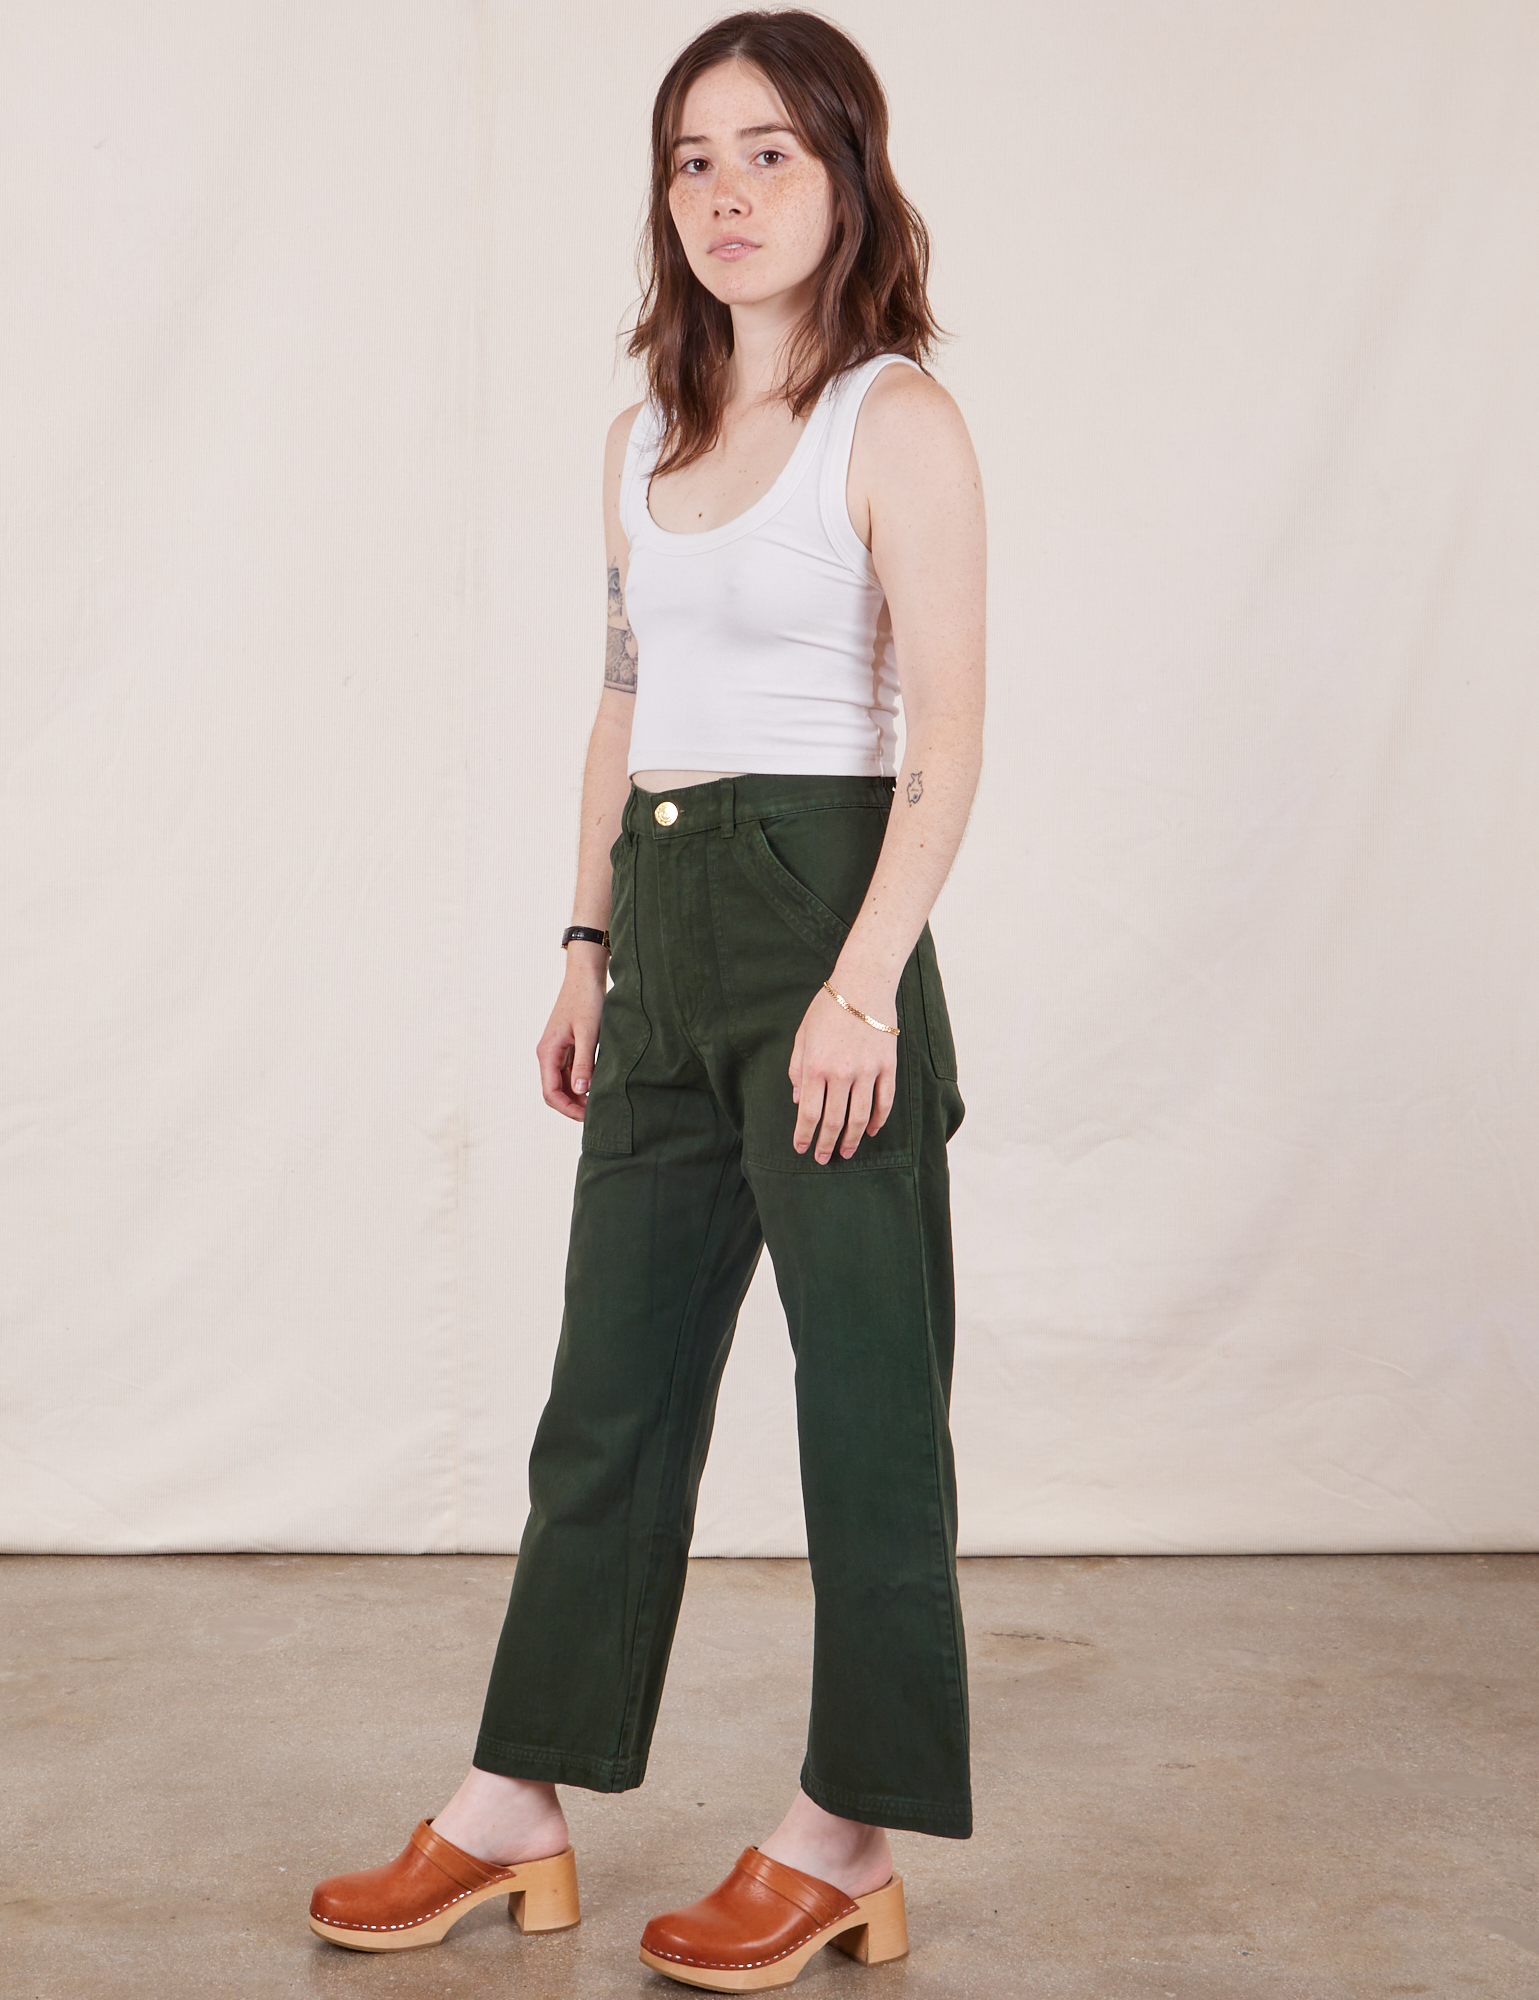 Angled view of Petite Work Pants in Swamp Green and vintage tee off-white Cropped Tank on Hana